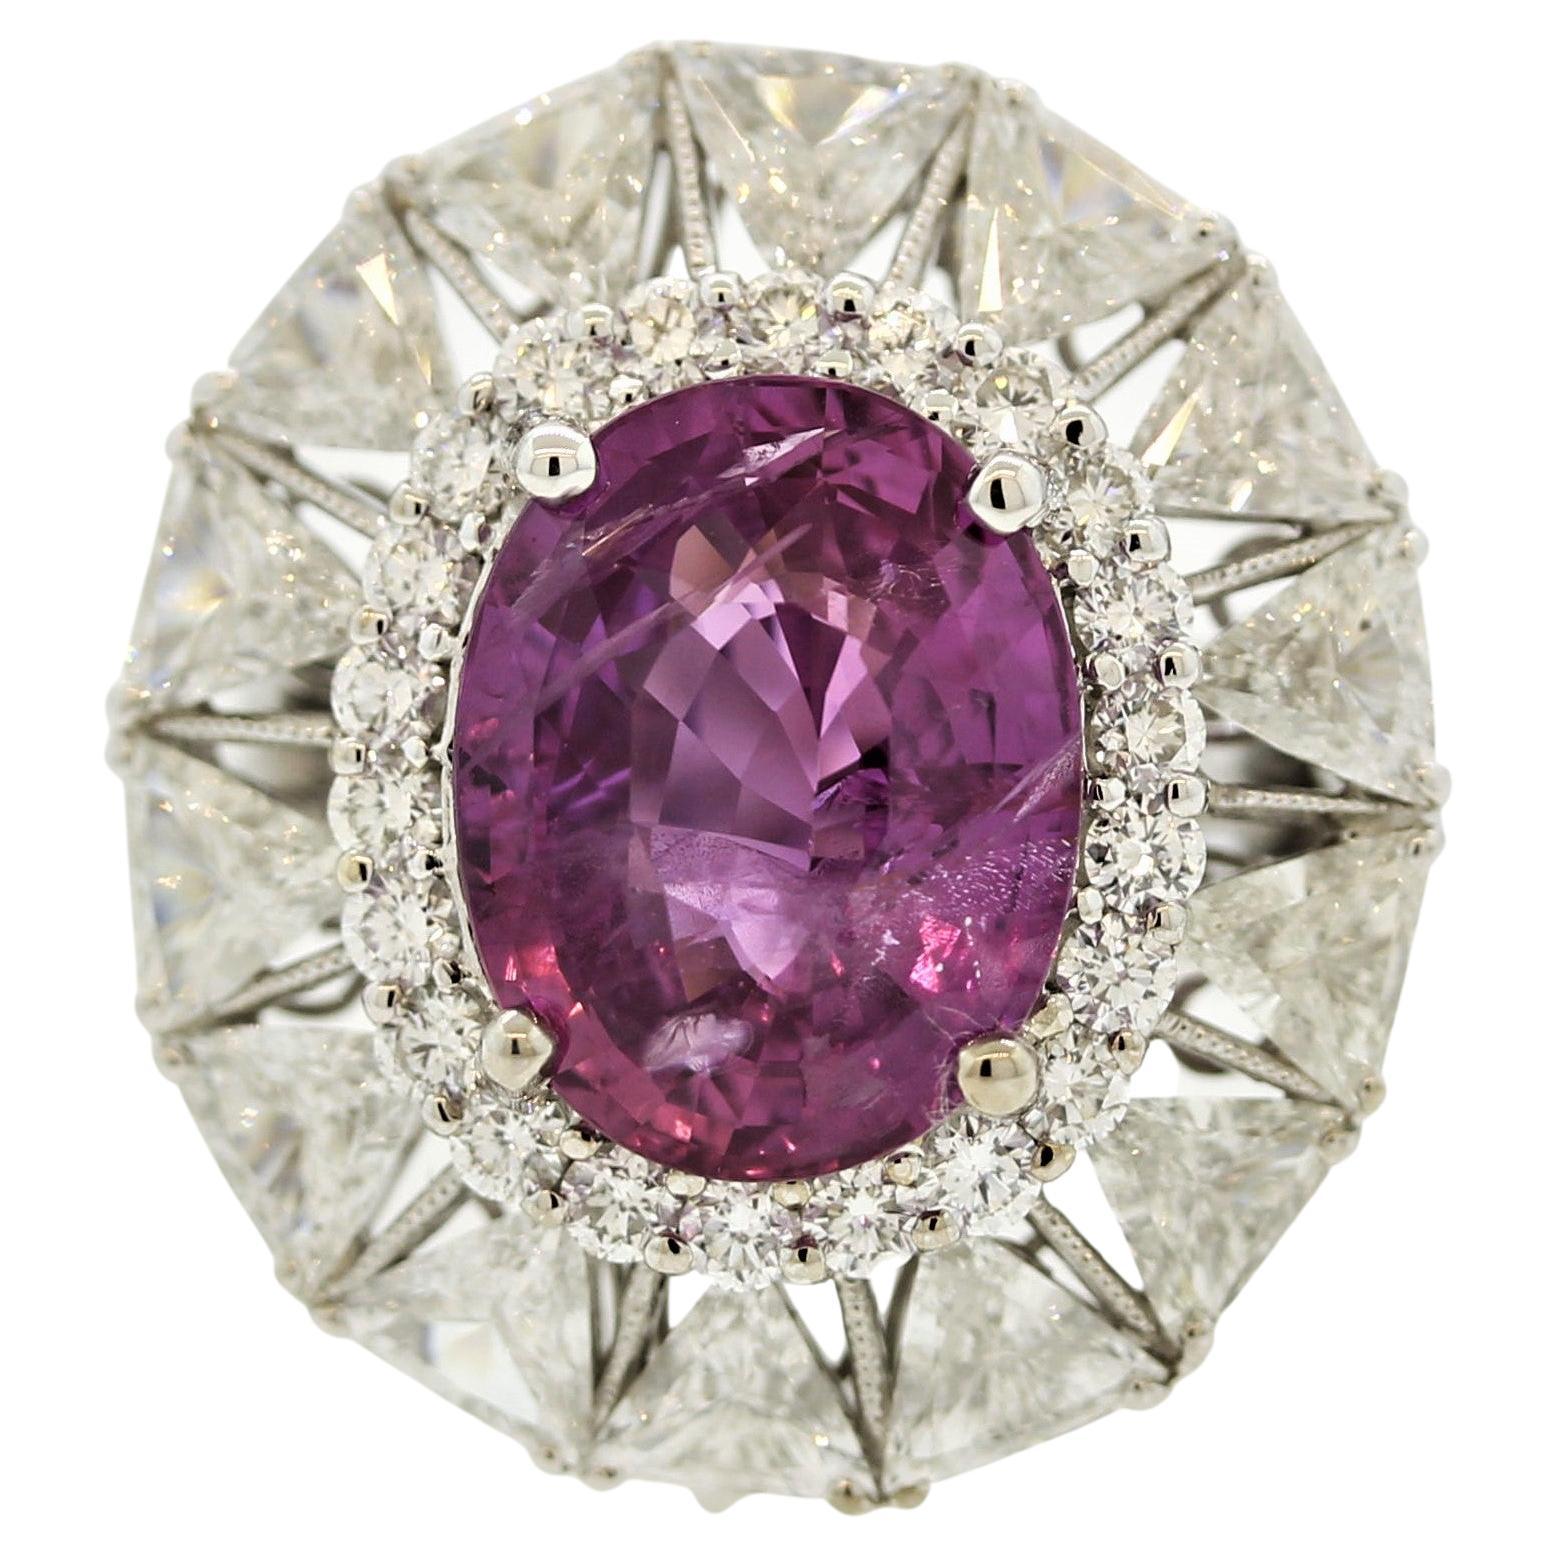 7.08ct No-Heat Pink Sapphire Diamond Gold Pendant-Ring, GIA Certified For Sale